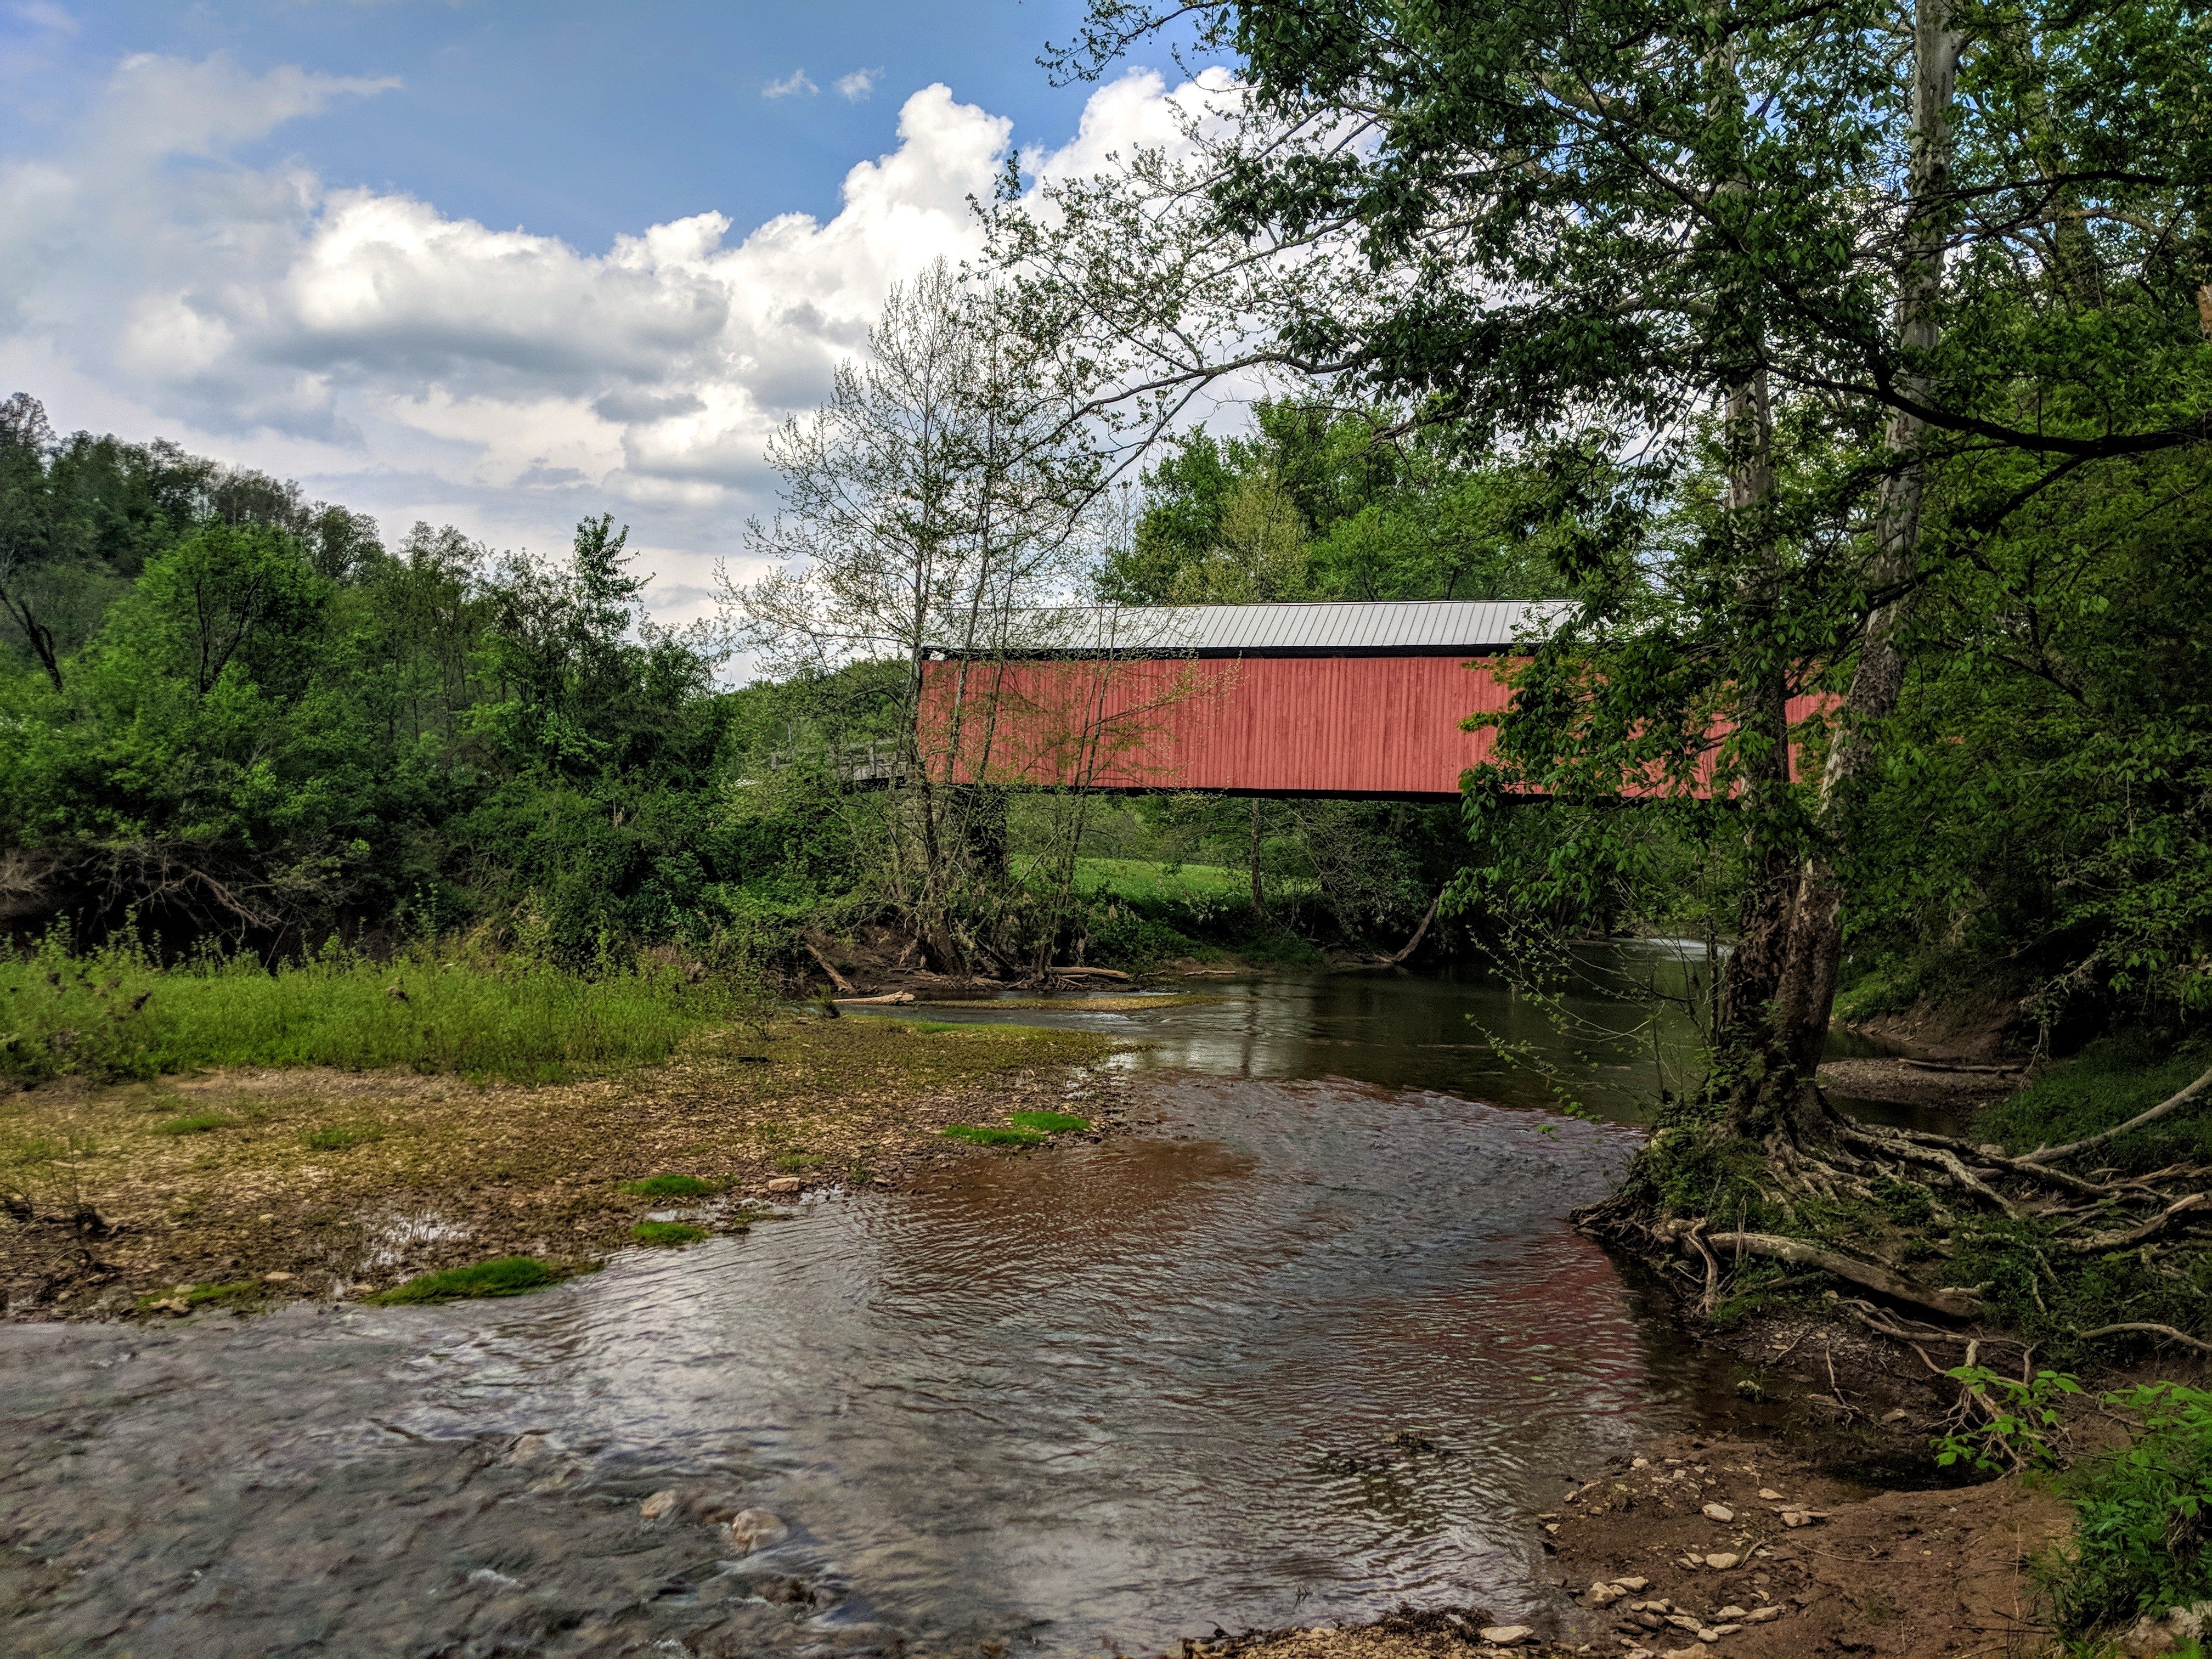 View of the covered bridge from the bank of the river.